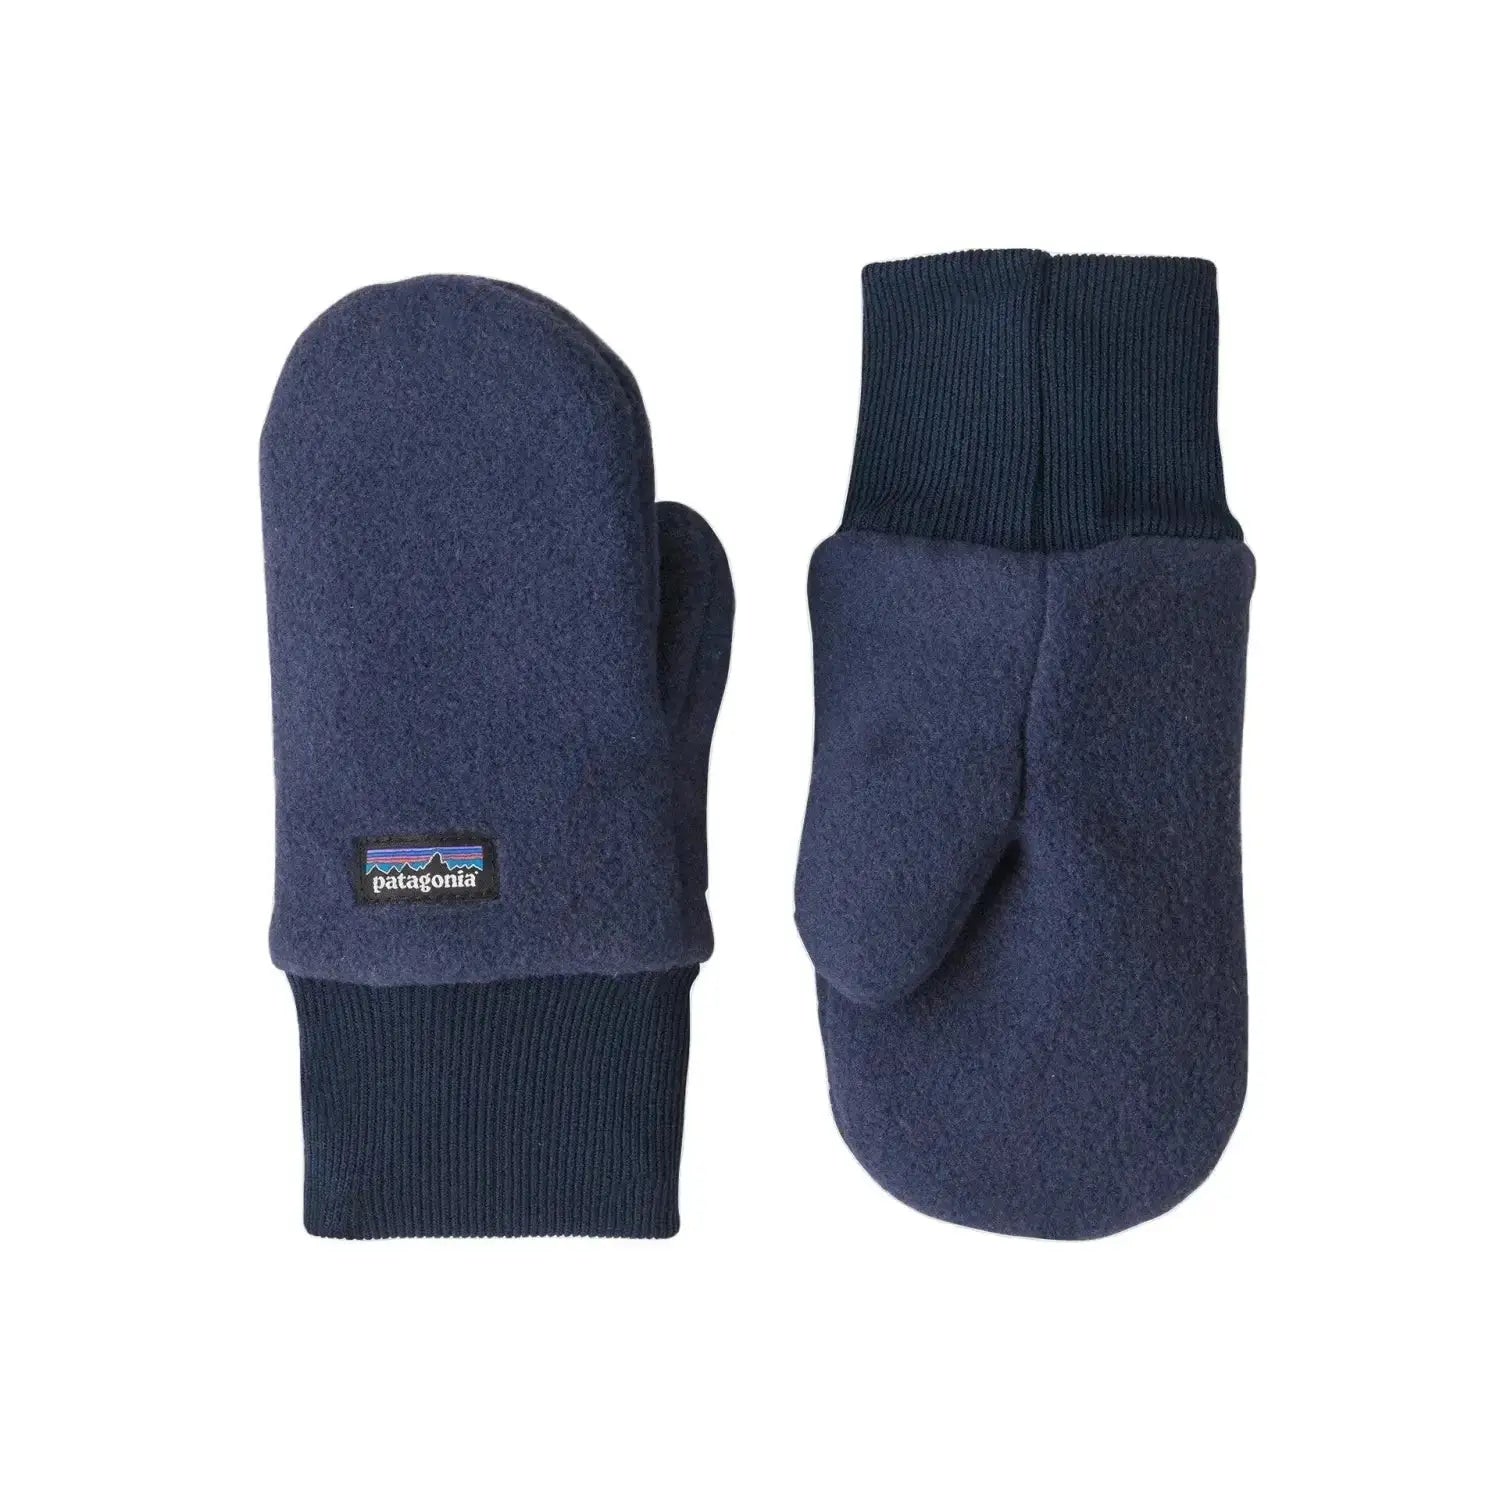 Patagonia Baby Pita Pocket Mitten shown in the New Navy color option.